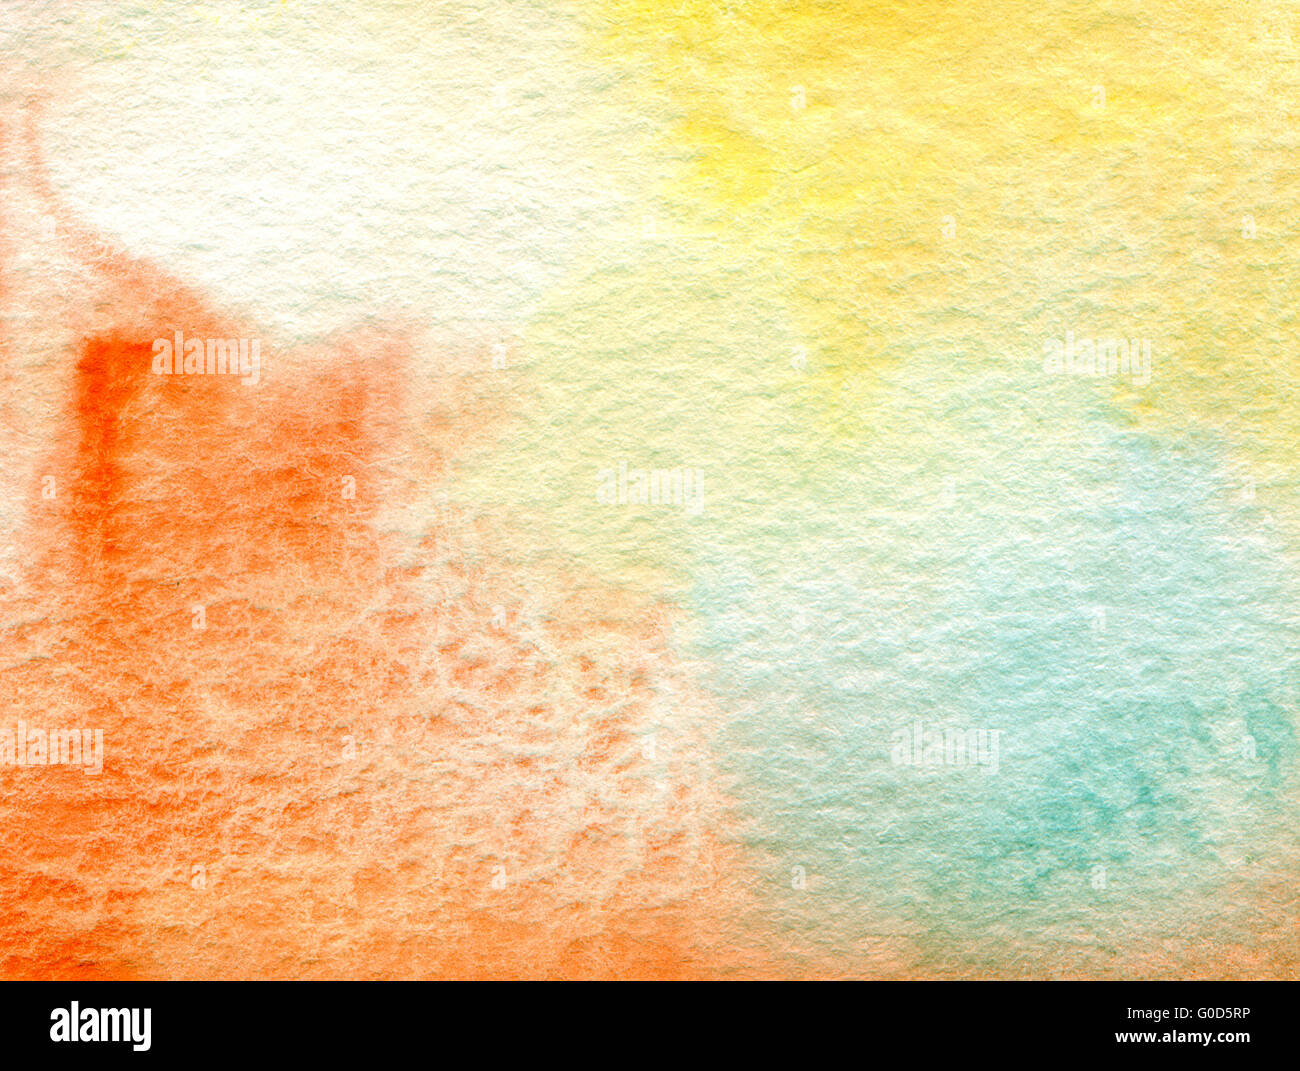 Abstract  watercolor painted background Stock Photo